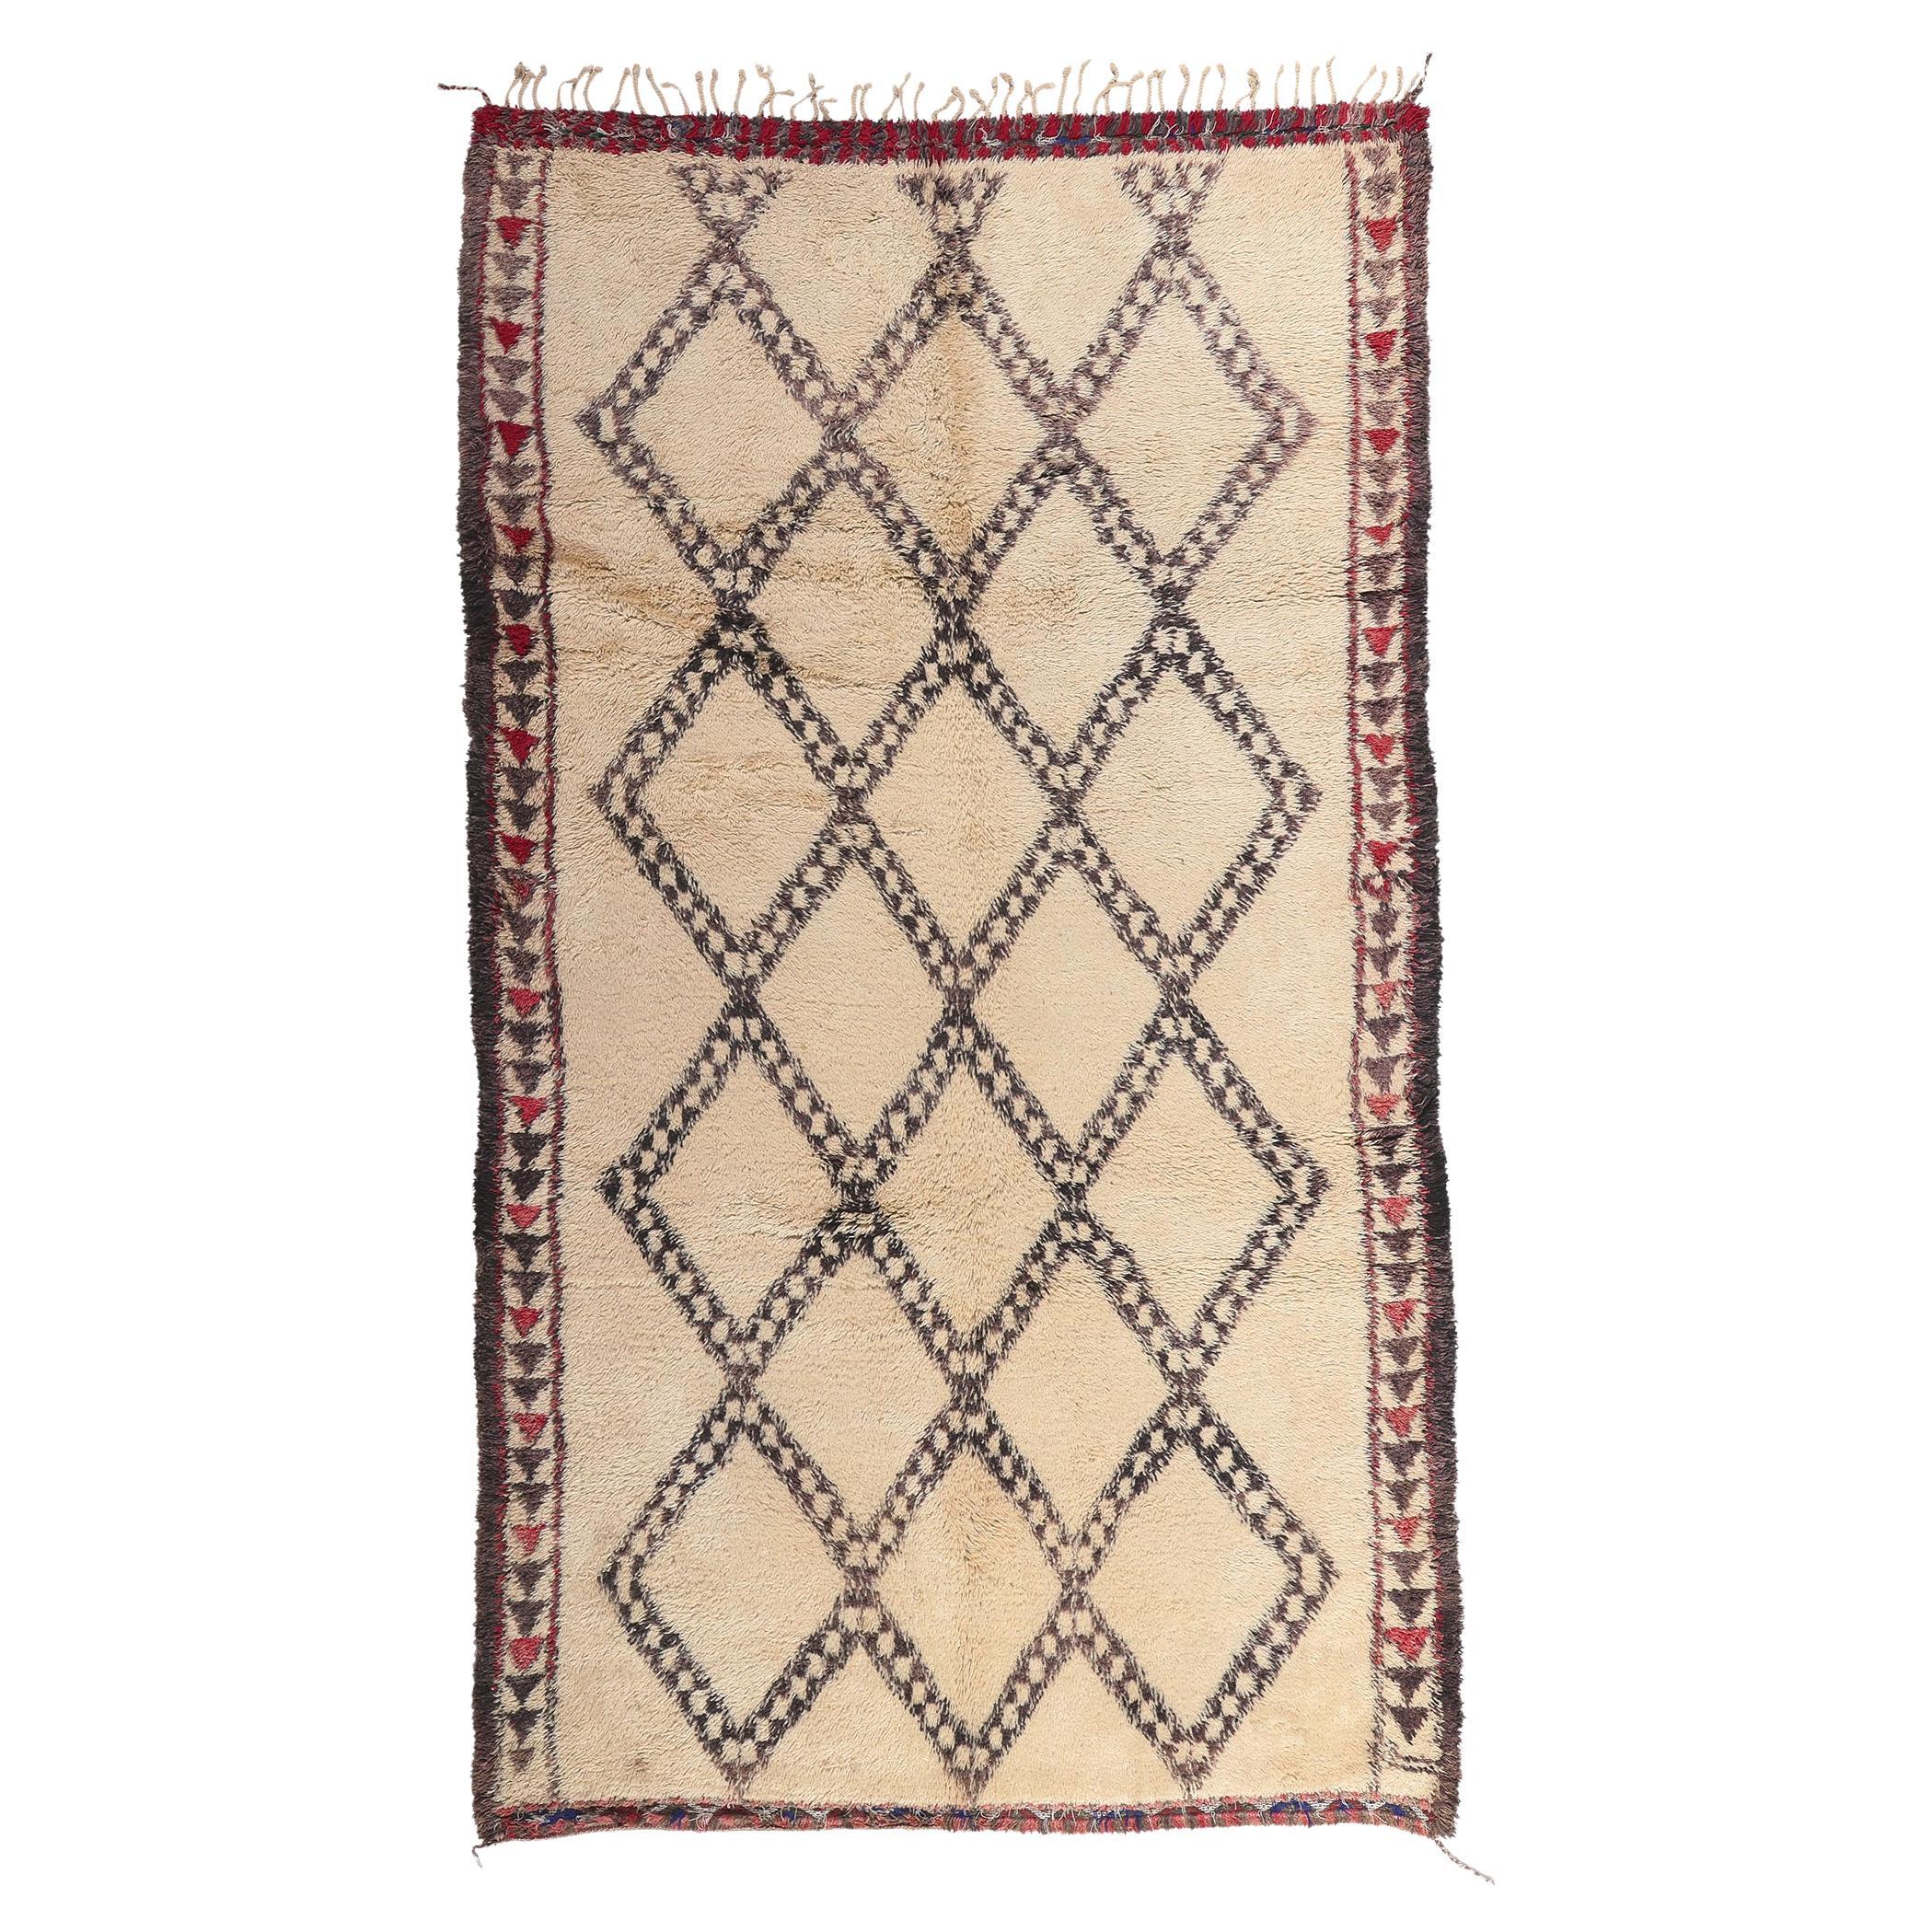 Vintage Moroccan Beni Ourain Rug, Cozy Nomad Meets Midcentury Modern Style